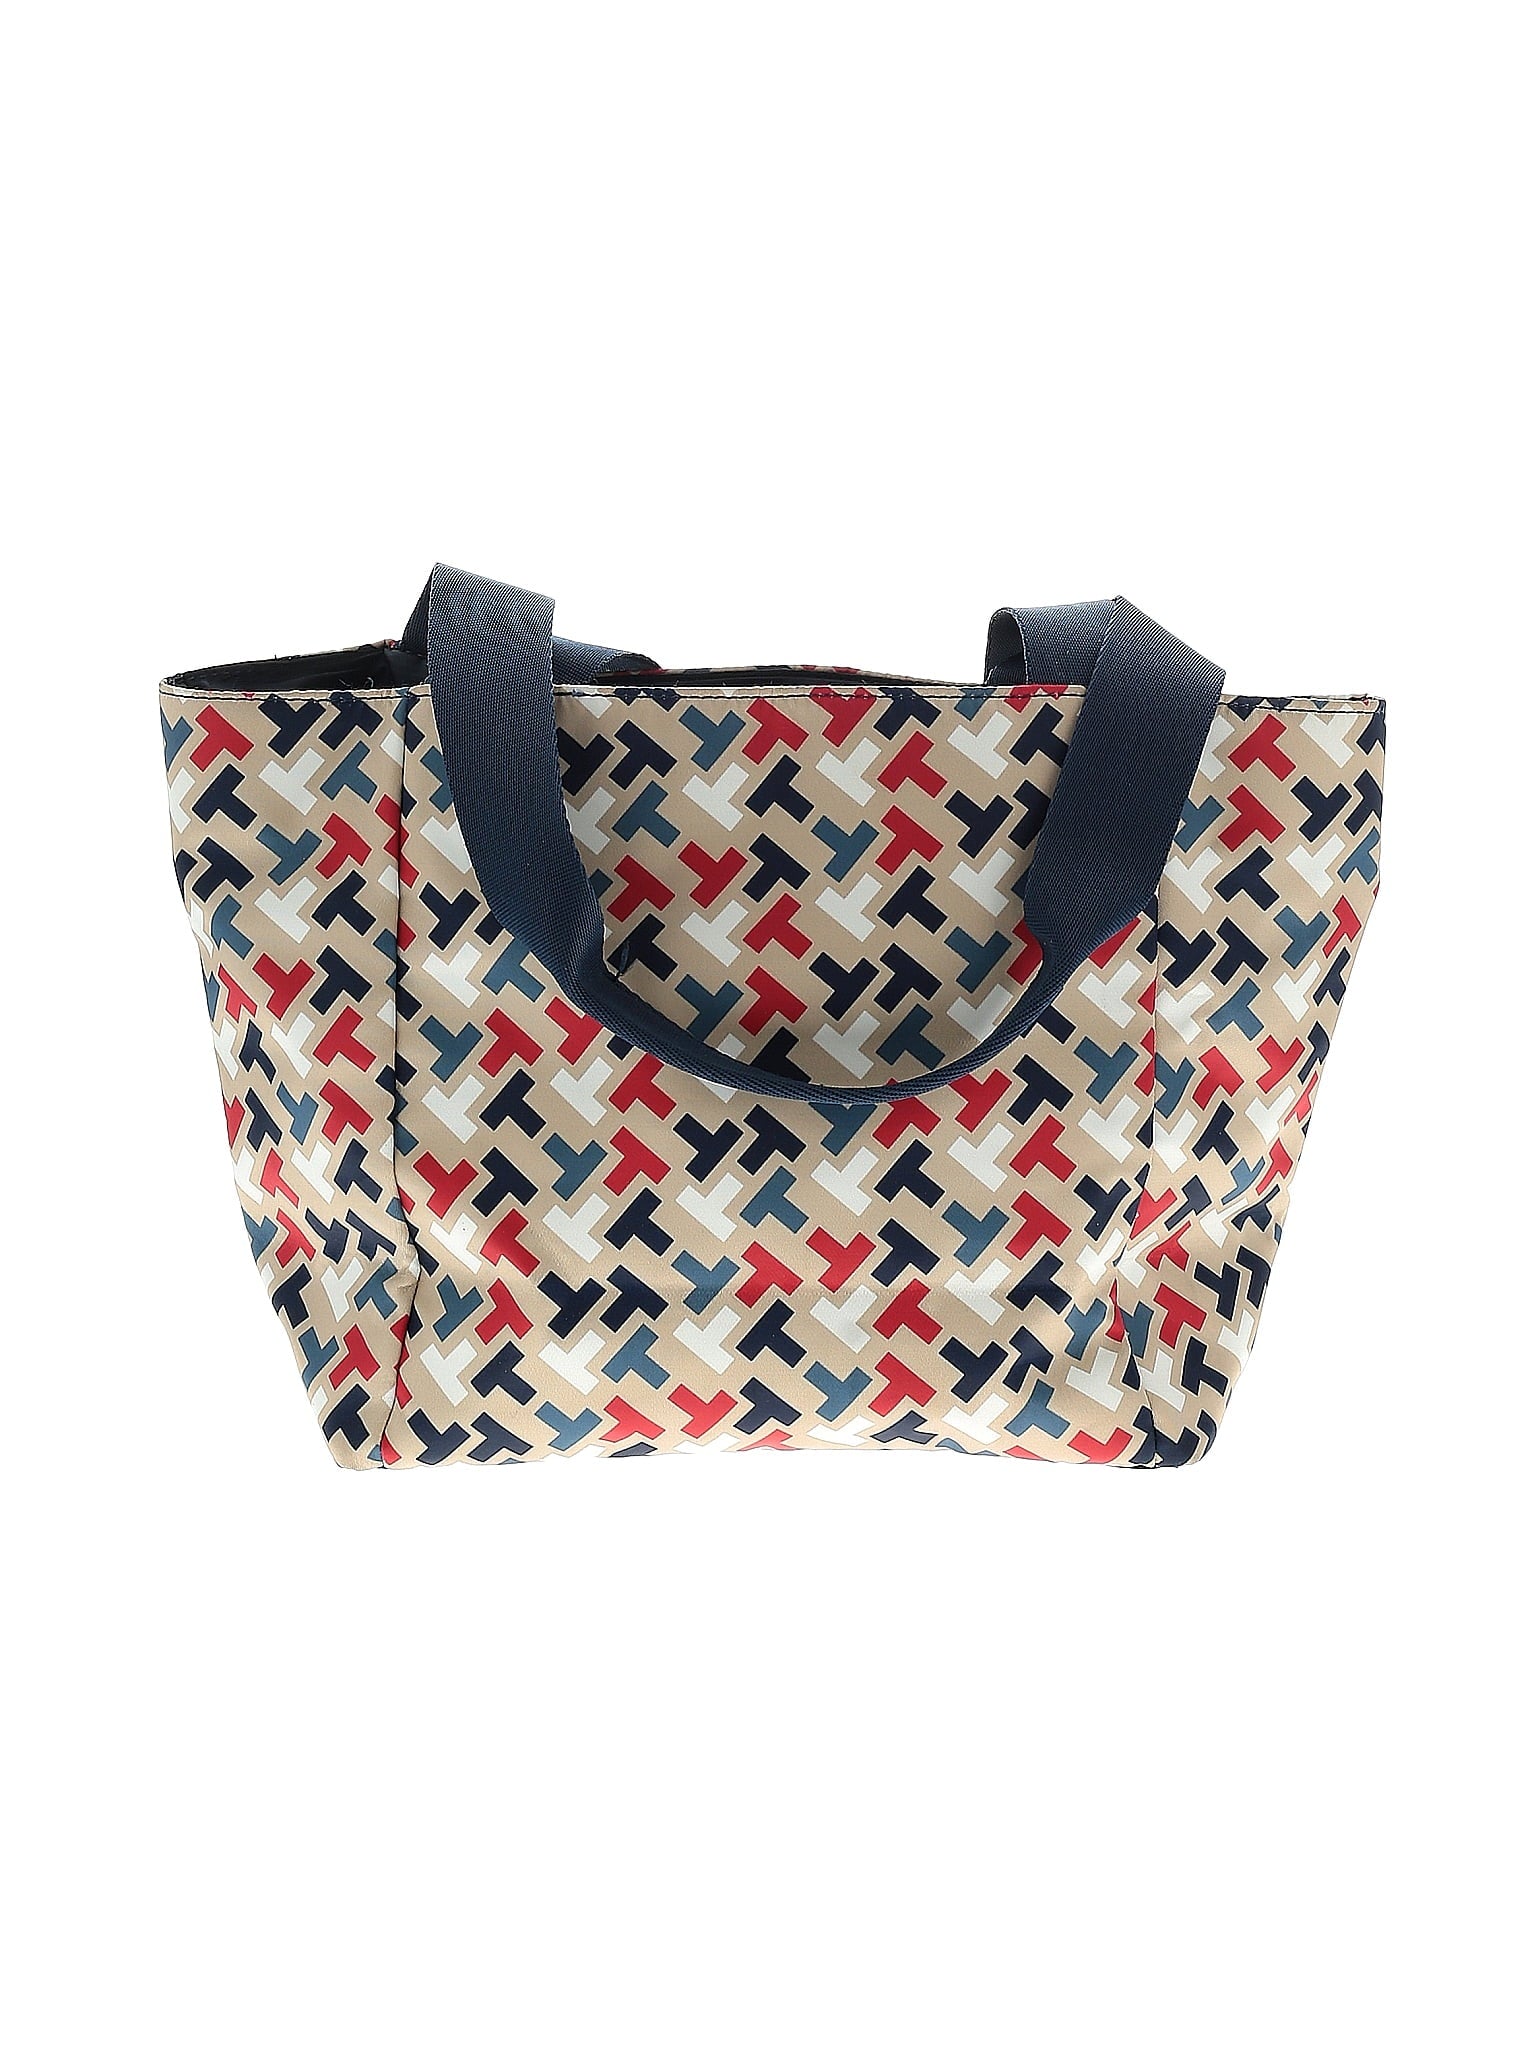 Tote size - One Size